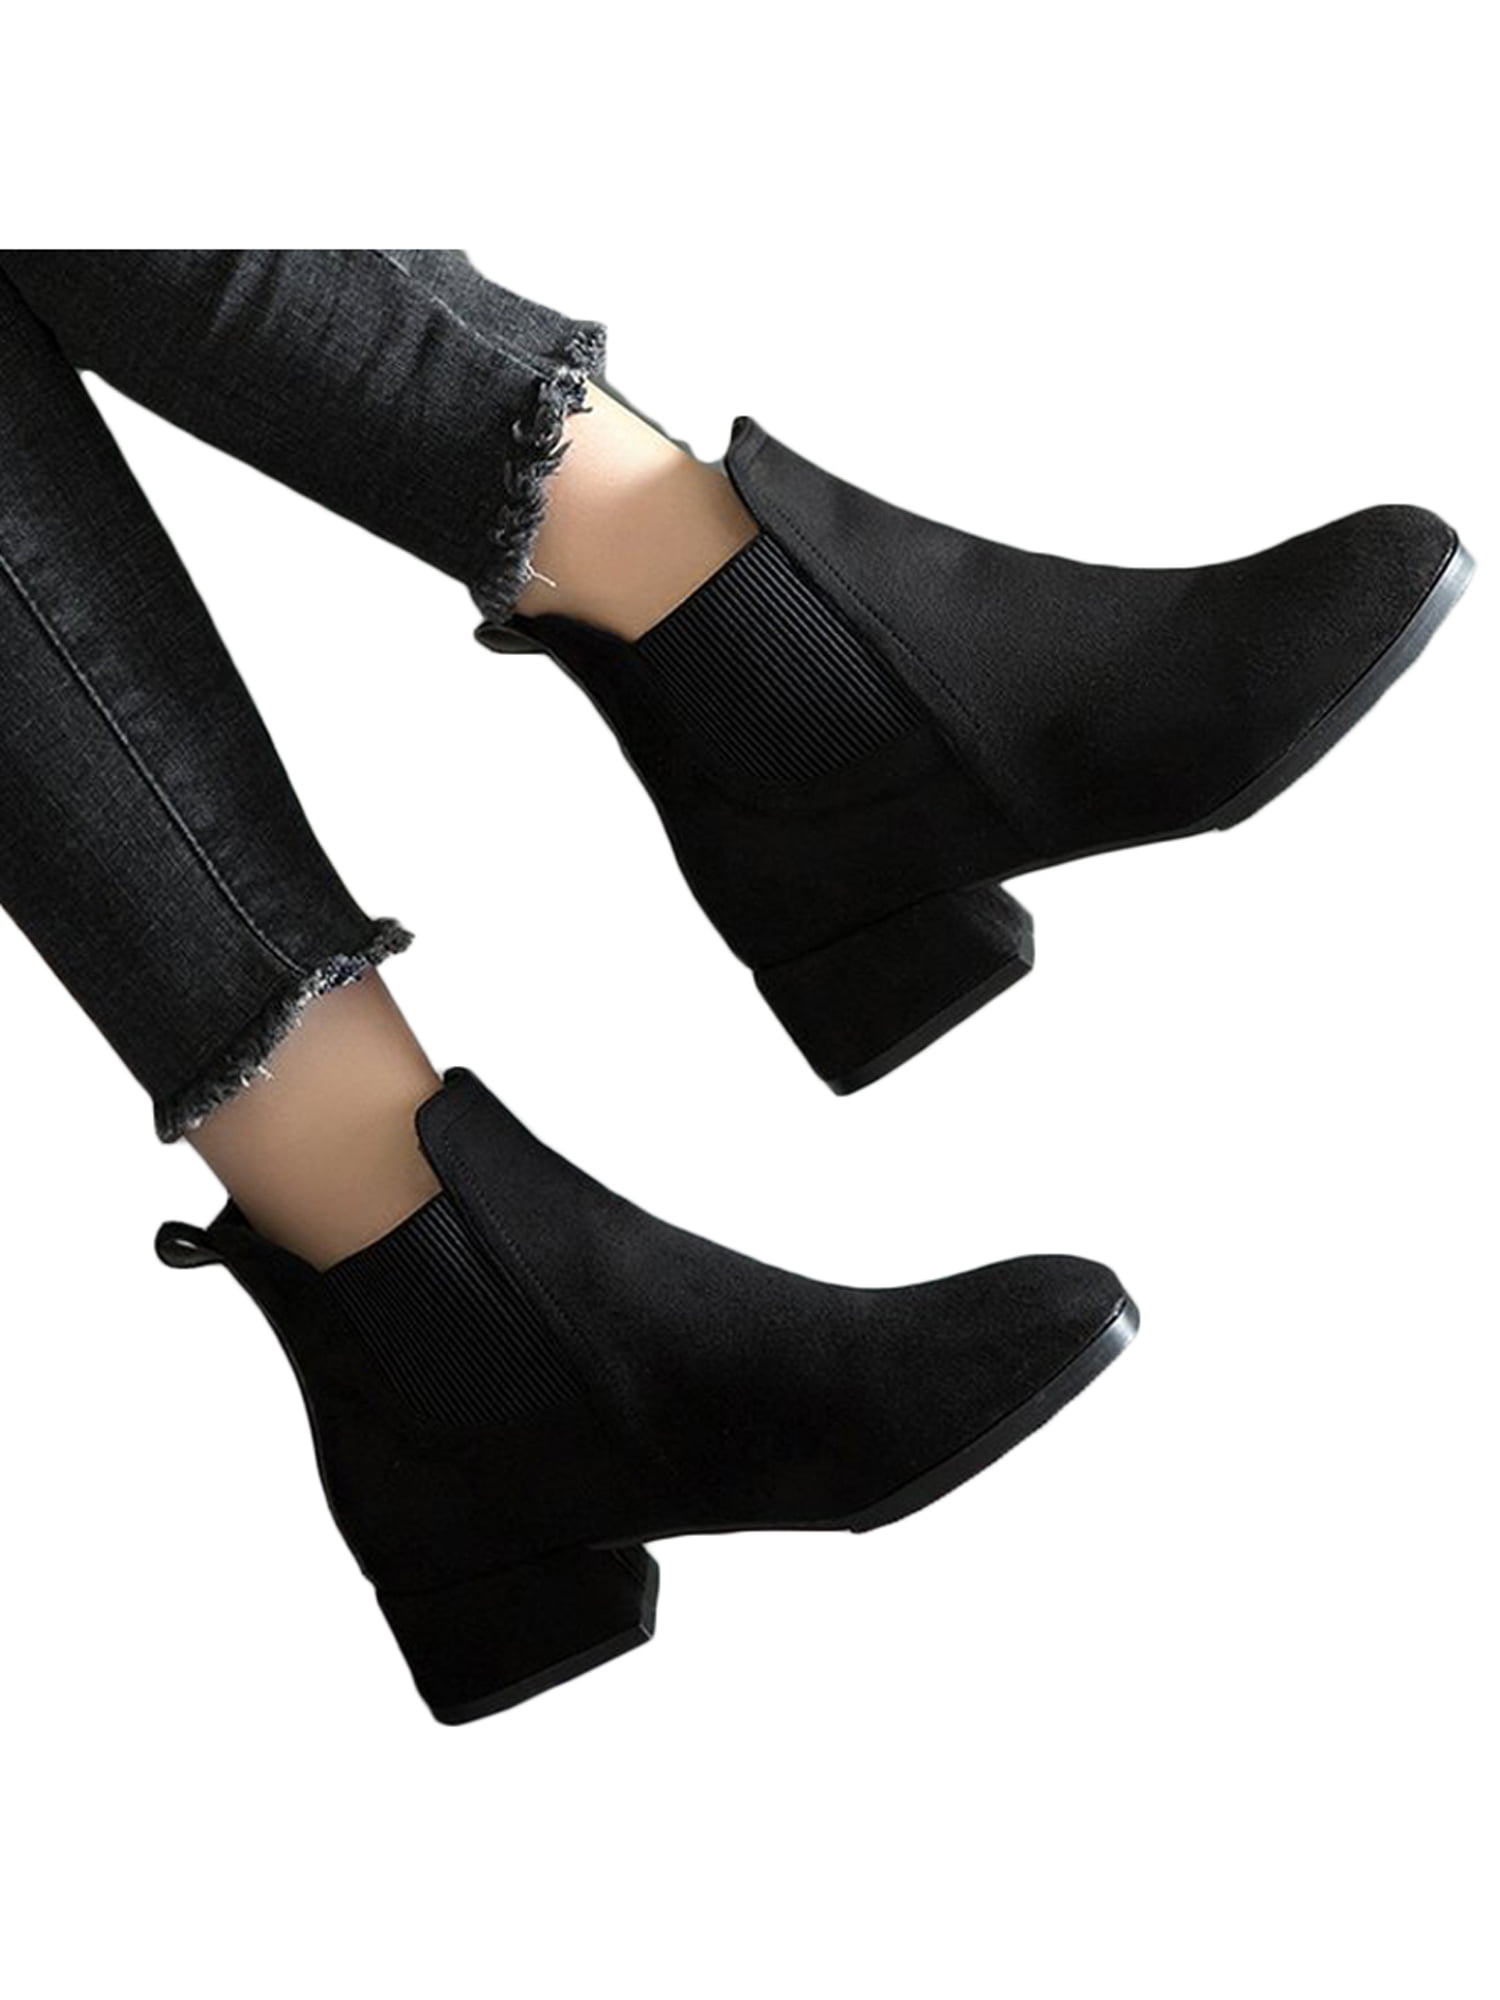 Women Pointed Square Toe Mid Block Heel Boots  Casual Ankle Boots Chelsea Shoes 